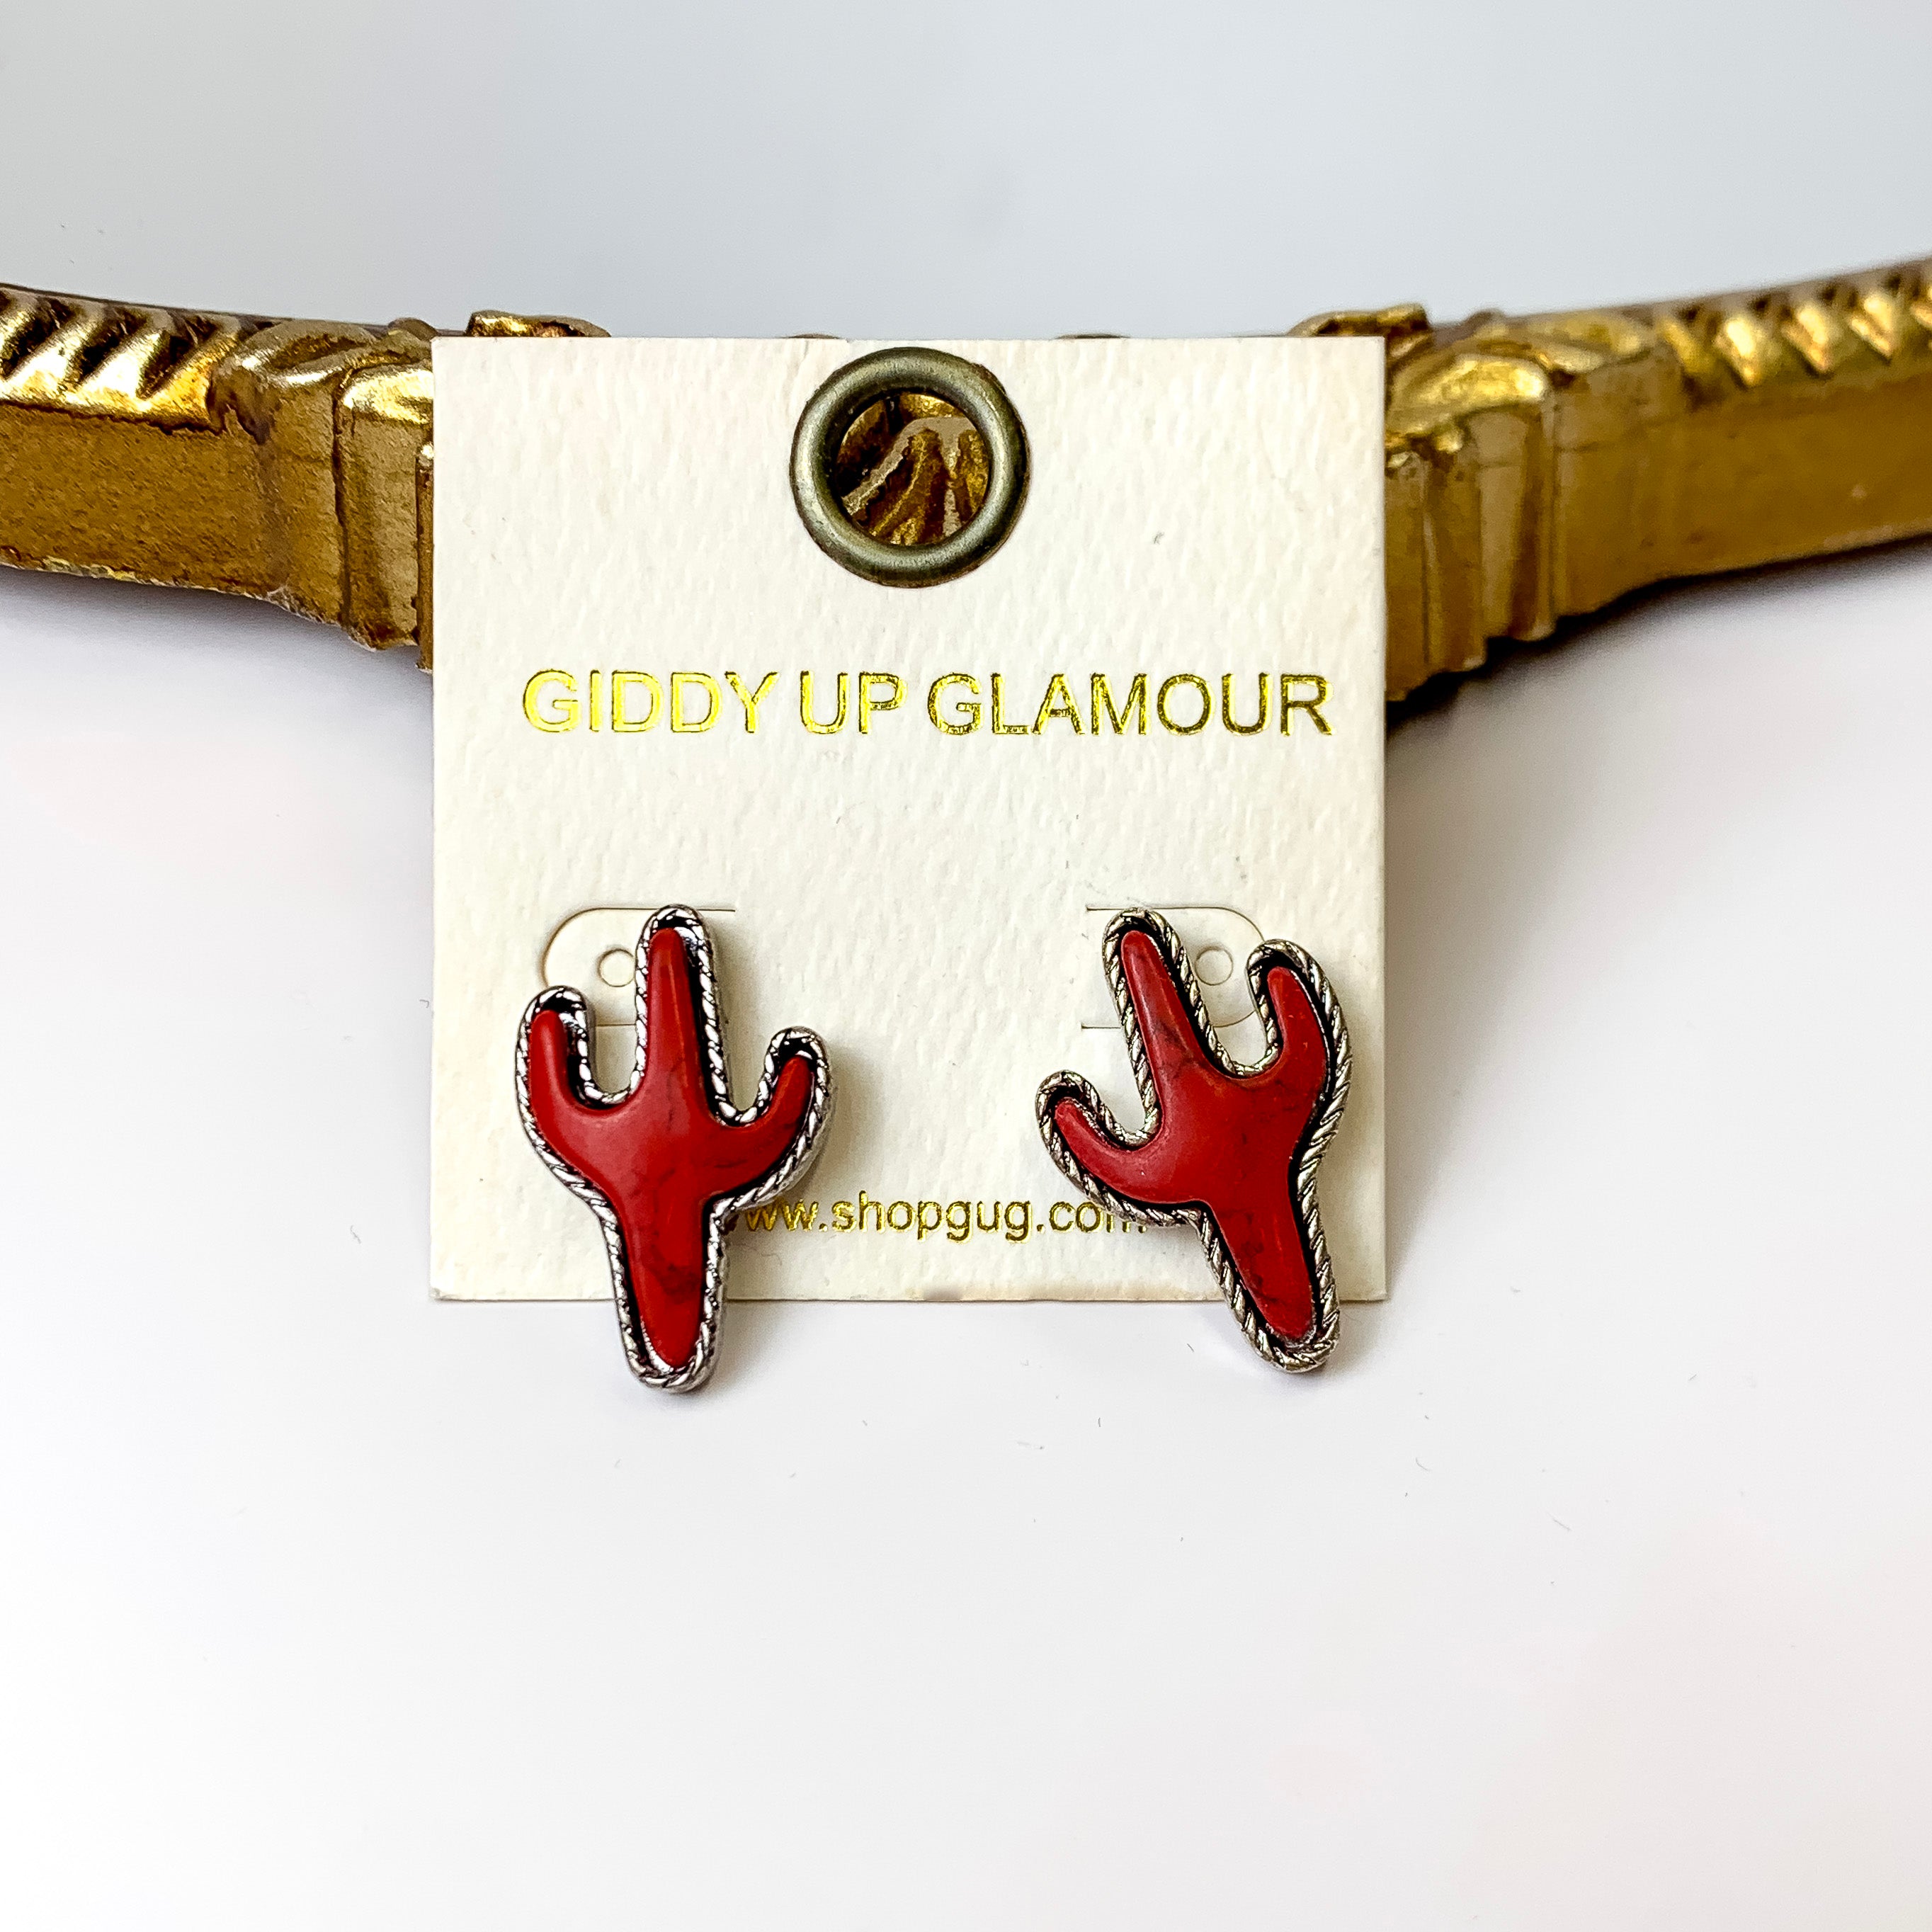 Desert Dreamin' Cactus Stud Earrings in Red - Giddy Up Glamour Boutique